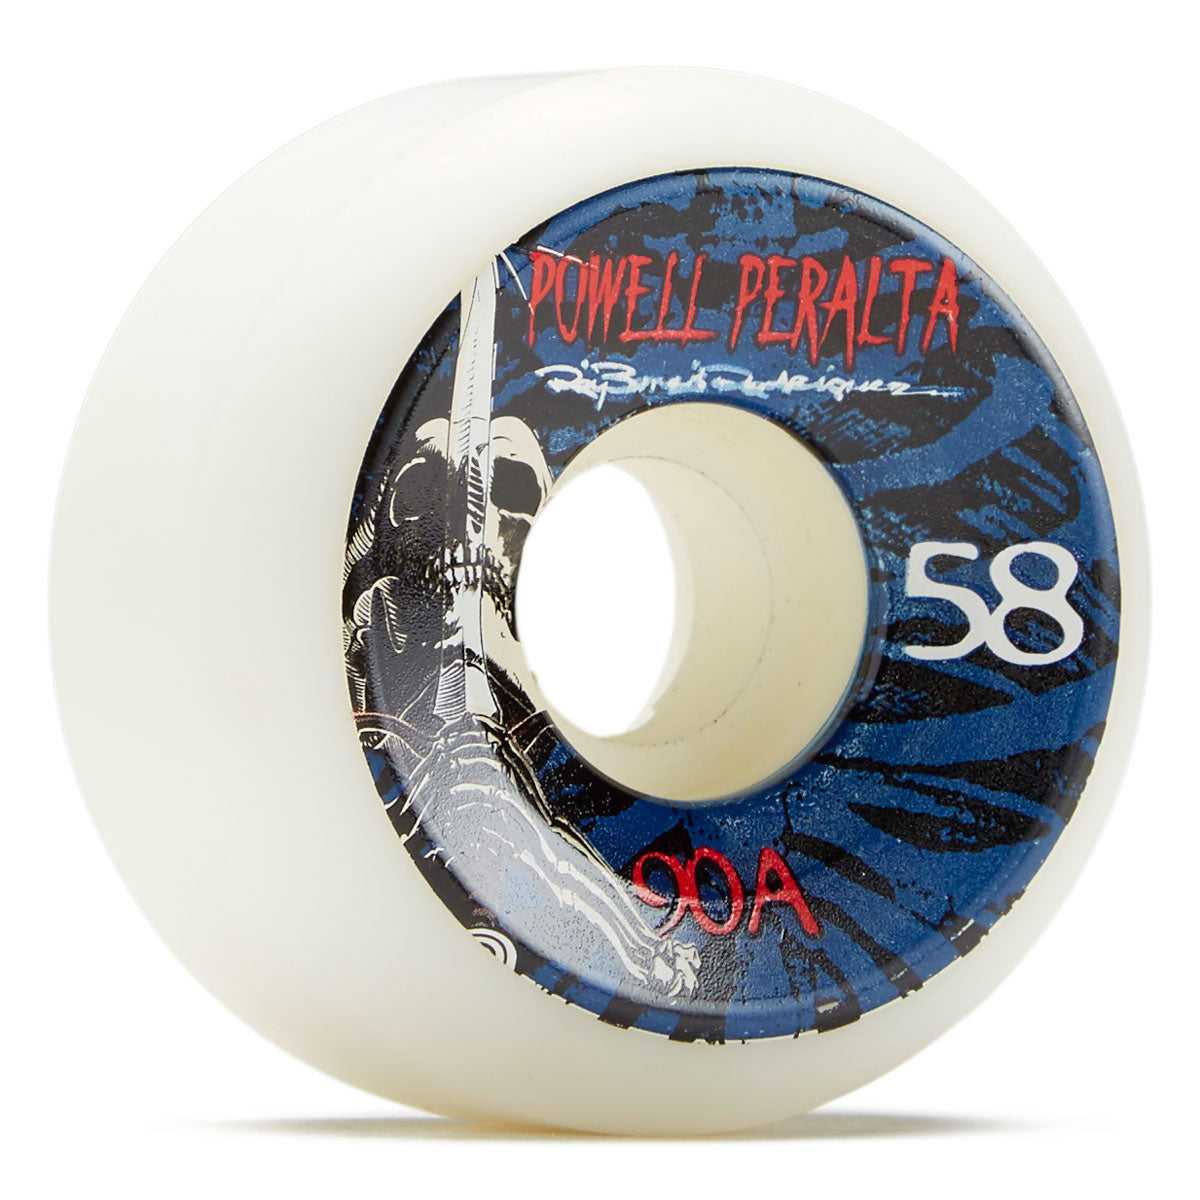 Powell-Peralta Skull and Sword 3 90A Skateboard Wheels - White - 58mm image 1